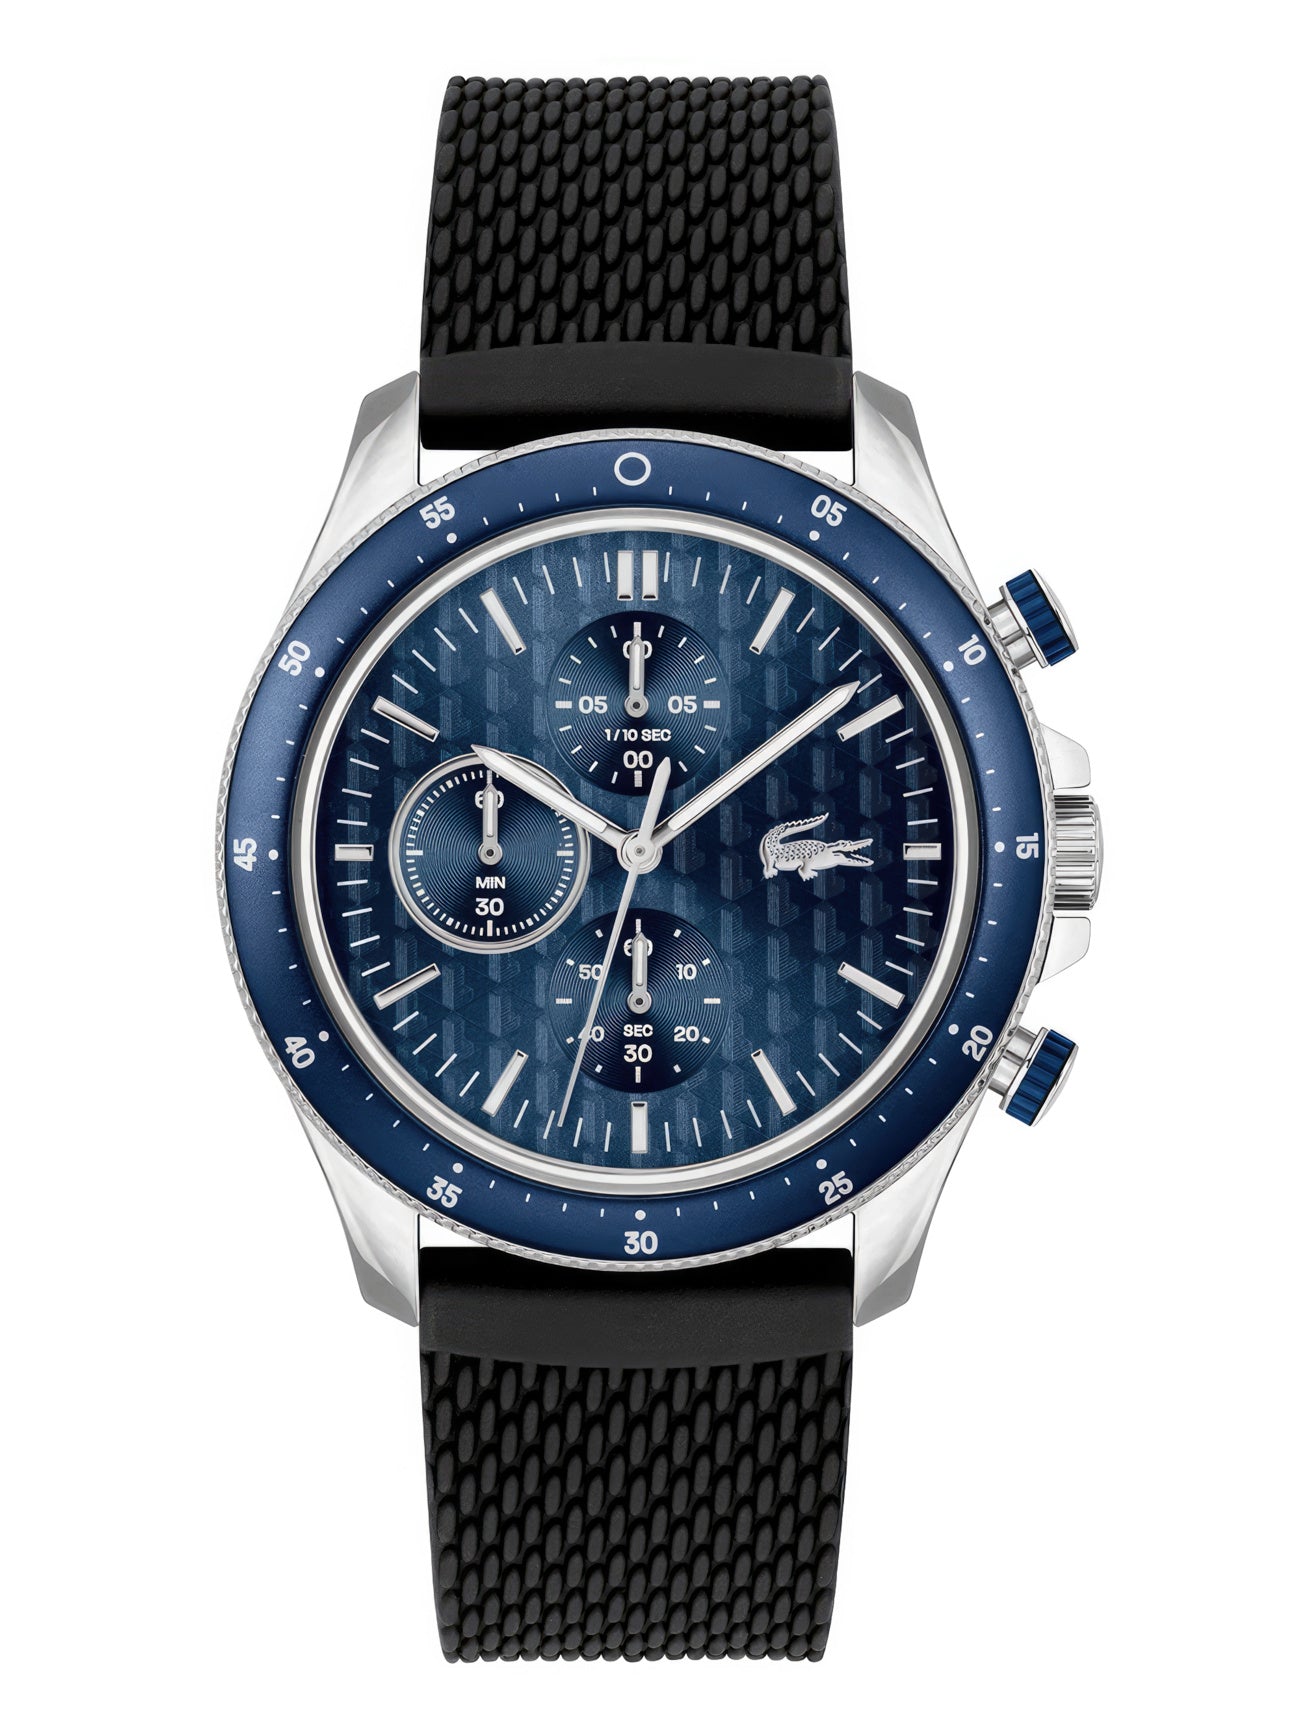 A Lacoste Men's Neoheritage Silver - Blue Watch with a blue dial and black strap.